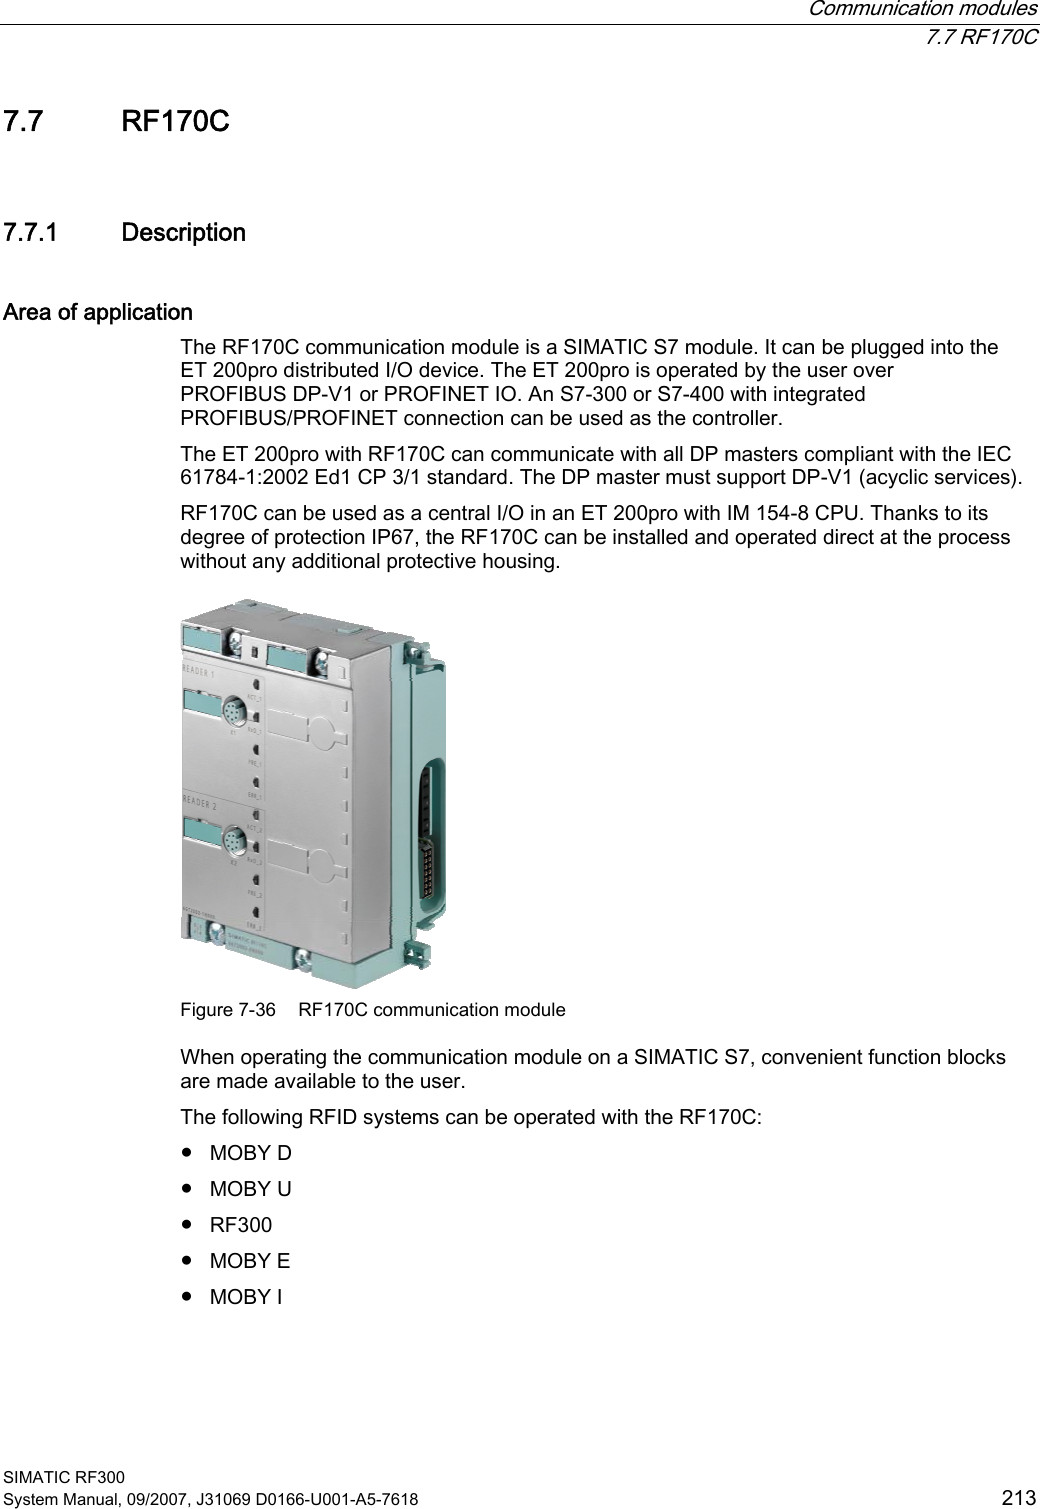  Communication modules  7.7 RF170C SIMATIC RF300 System Manual, 09/2007, J31069 D0166-U001-A5-7618  213 7.7 RF170C 7.7.1 Description Area of application The RF170C communication module is a SIMATIC S7 module. It can be plugged into the ET 200pro distributed I/O device. The ET 200pro is operated by the user over PROFIBUS DP-V1 or PROFINET IO. An S7-300 or S7-400 with integrated PROFIBUS/PROFINET connection can be used as the controller.  The ET 200pro with RF170C can communicate with all DP masters compliant with the IEC 61784-1:2002 Ed1 CP 3/1 standard. The DP master must support DP-V1 (acyclic services). RF170C can be used as a central I/O in an ET 200pro with IM 154-8 CPU. Thanks to its degree of protection IP67, the RF170C can be installed and operated direct at the process without any additional protective housing.  Figure 7-36  RF170C communication module When operating the communication module on a SIMATIC S7, convenient function blocks are made available to the user. The following RFID systems can be operated with the RF170C: ●  MOBY D ●  MOBY U ●  RF300 ●  MOBY E ●  MOBY I 